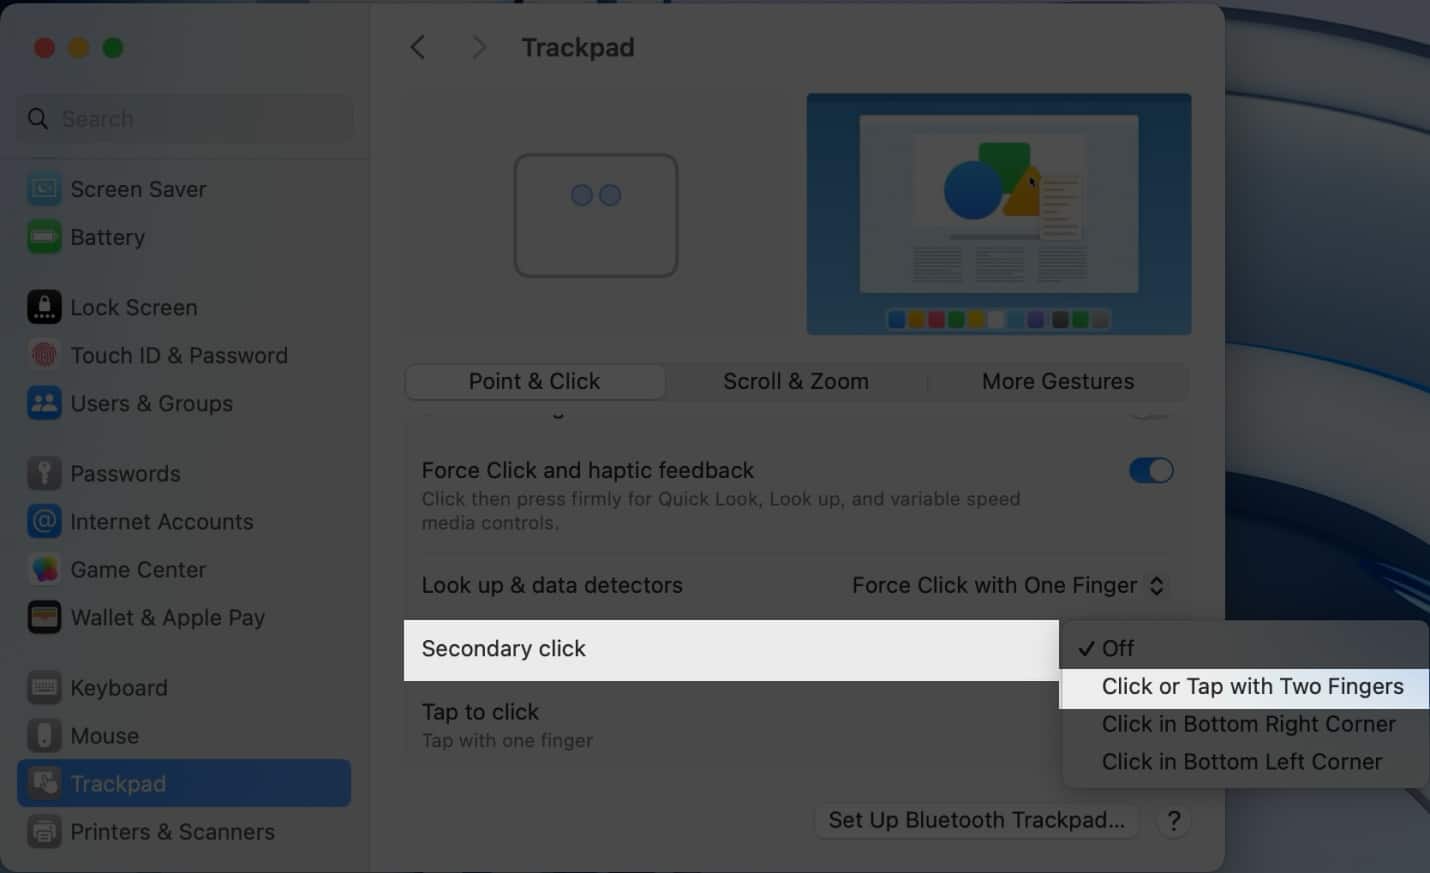 Secondary click settings in System Settings under Trackpad section